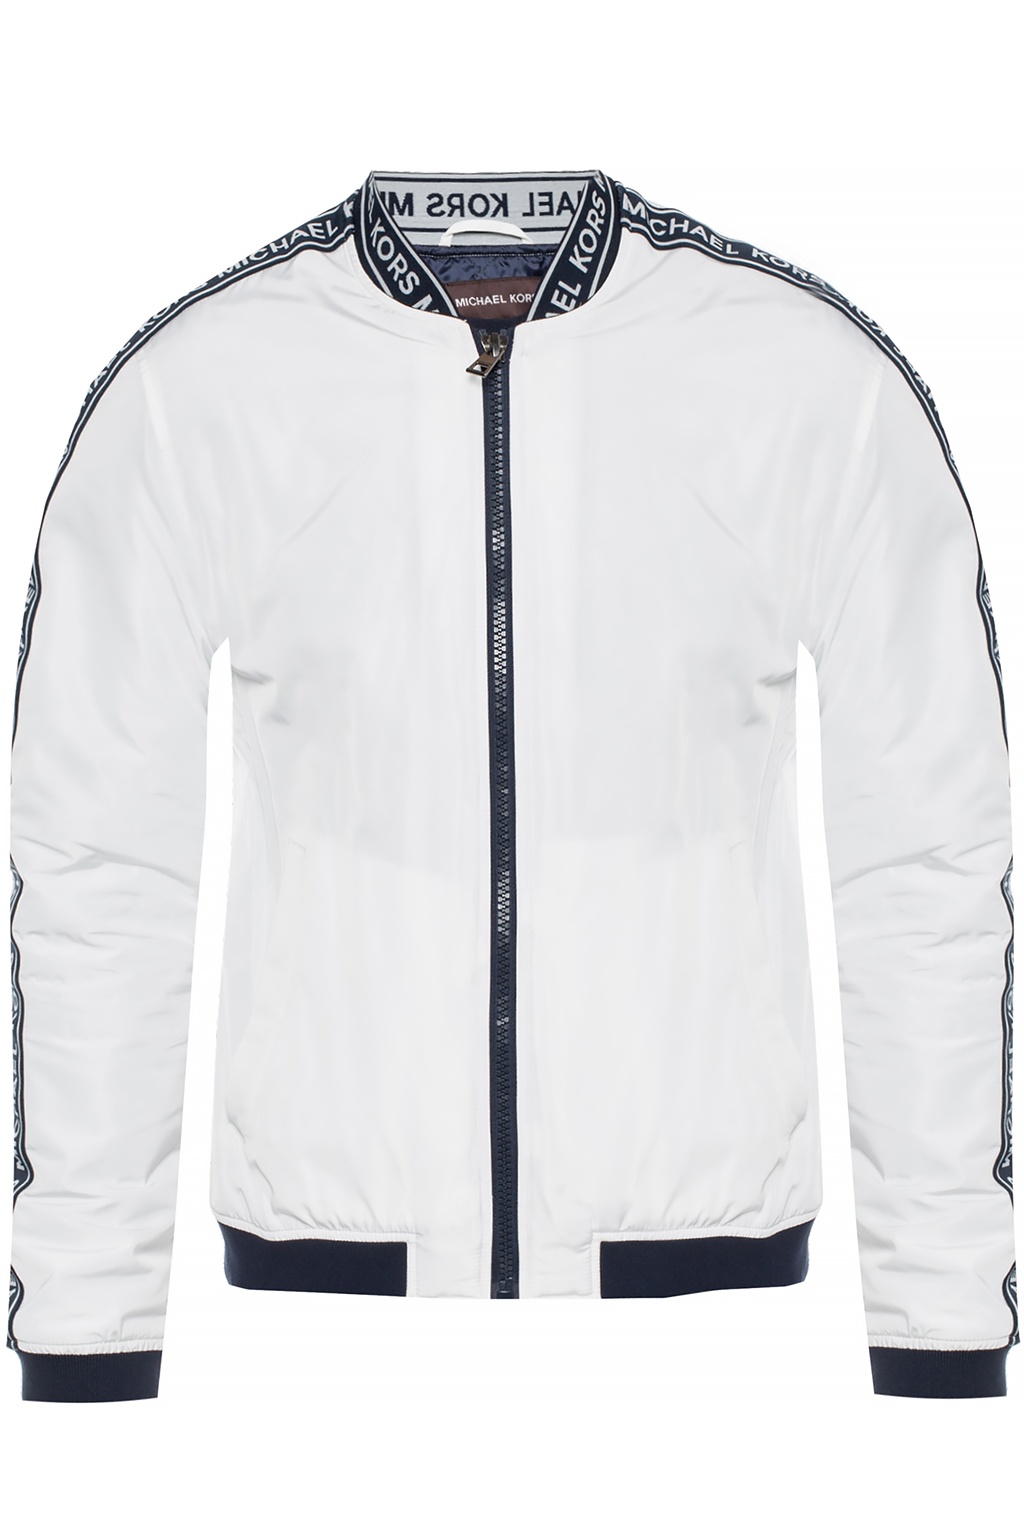 michael kors white parka  OFF51 Free Delivery